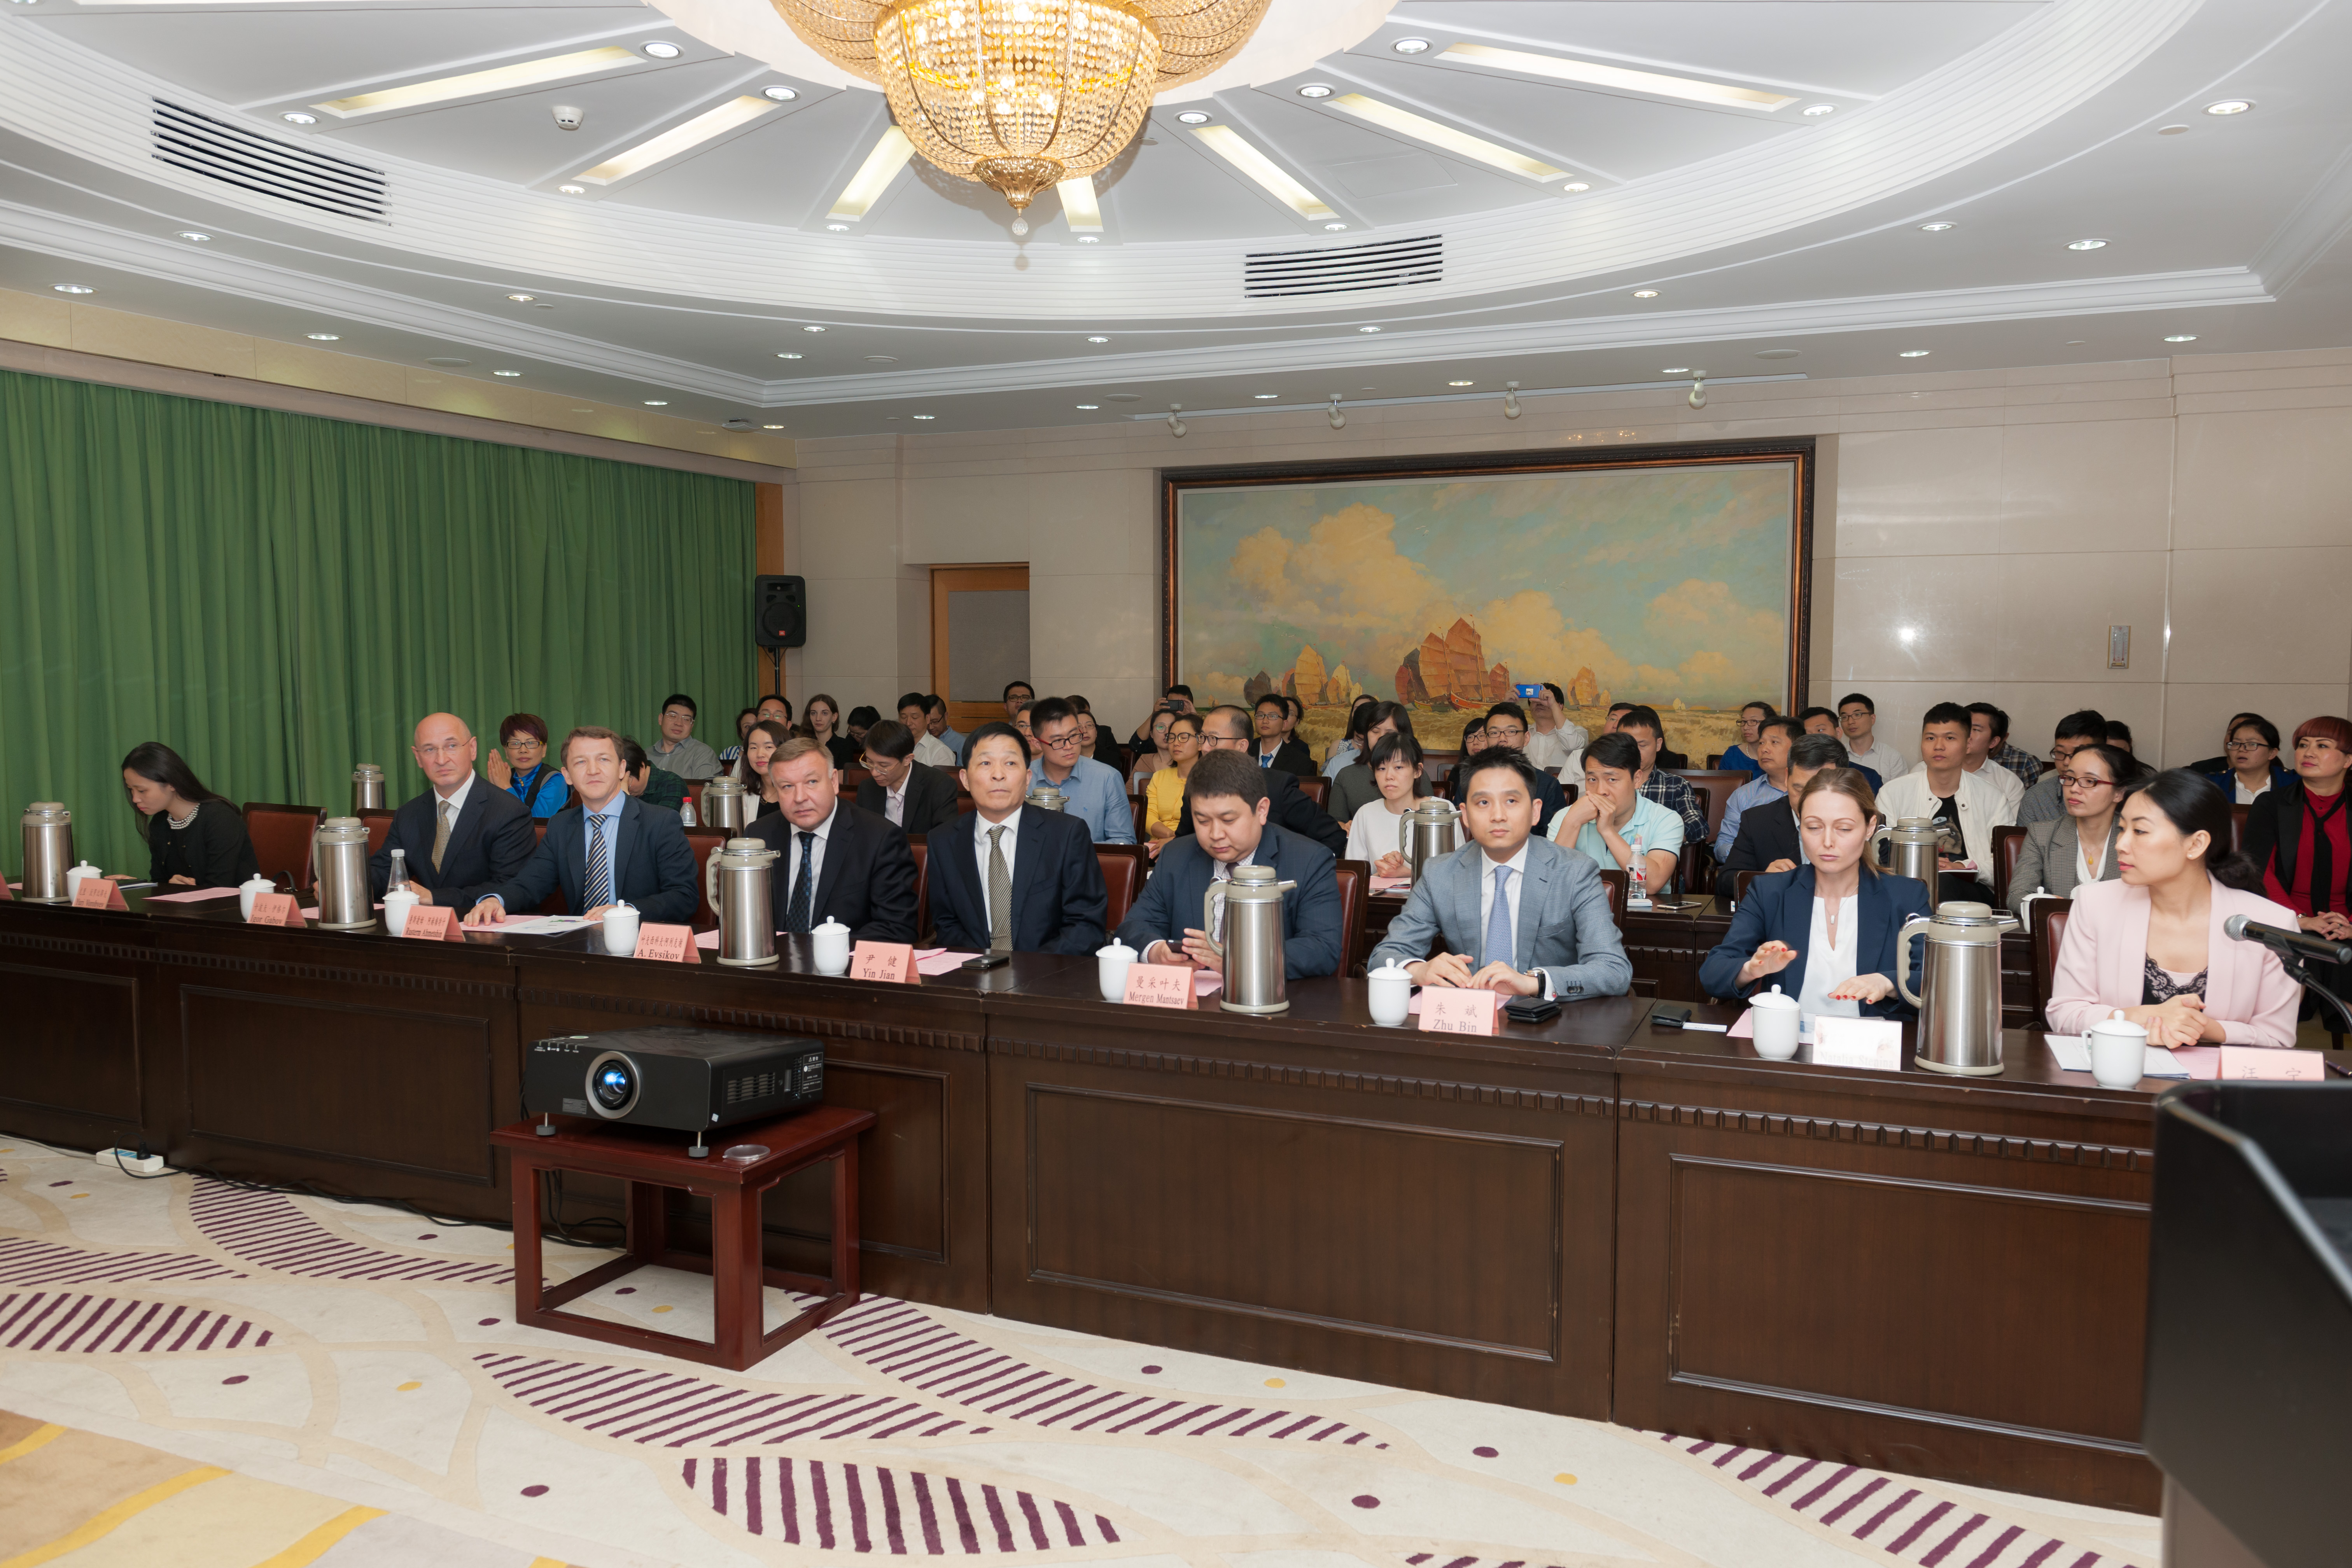 Russian law firm in China, seminar